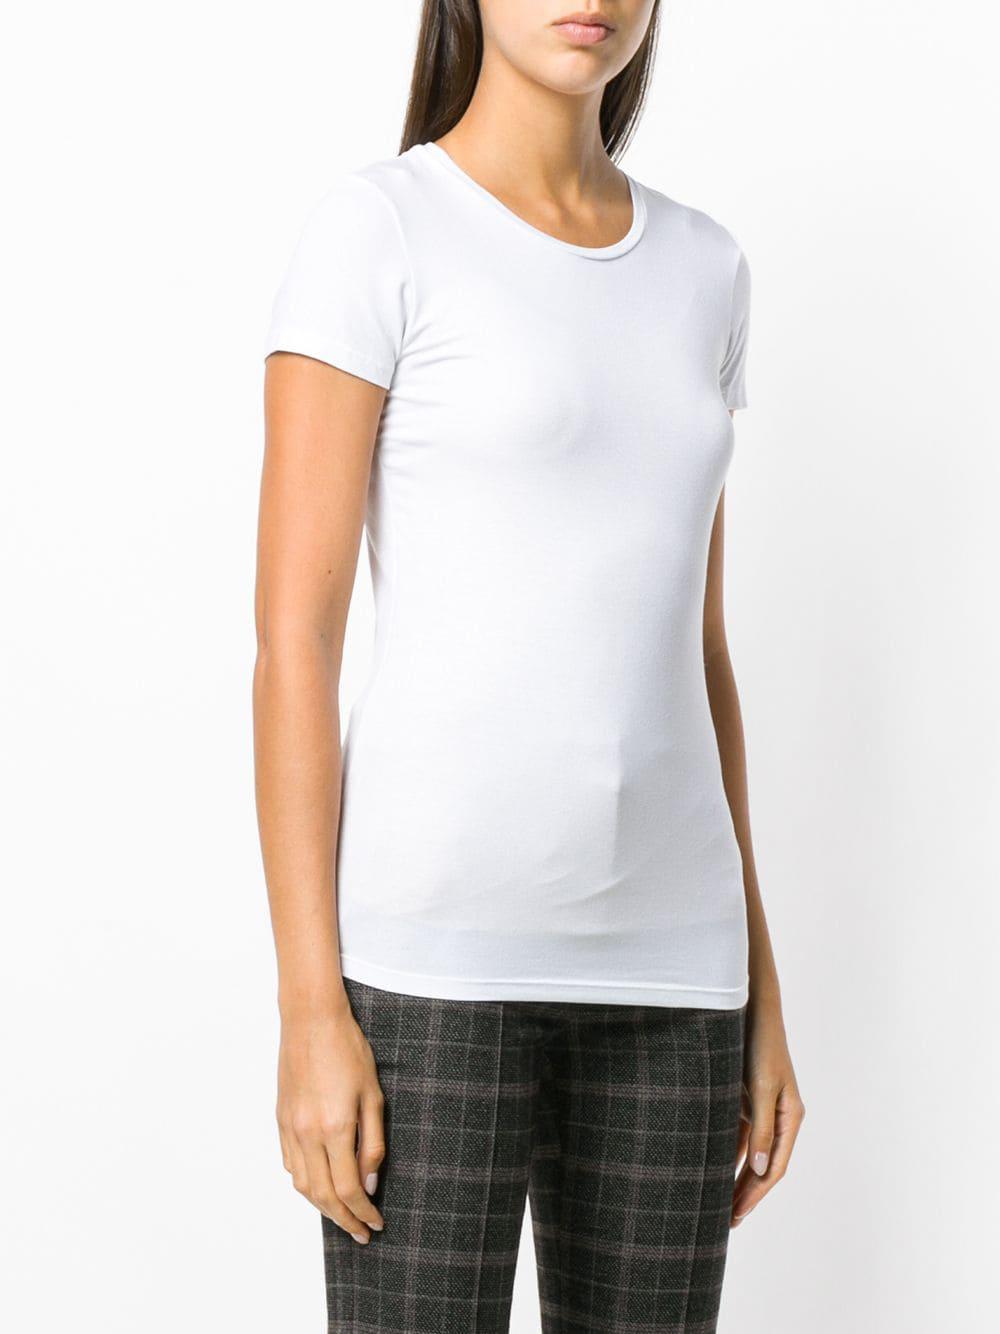 Lyst - Majestic Filatures Short-sleeve Fitted T-shirt in White